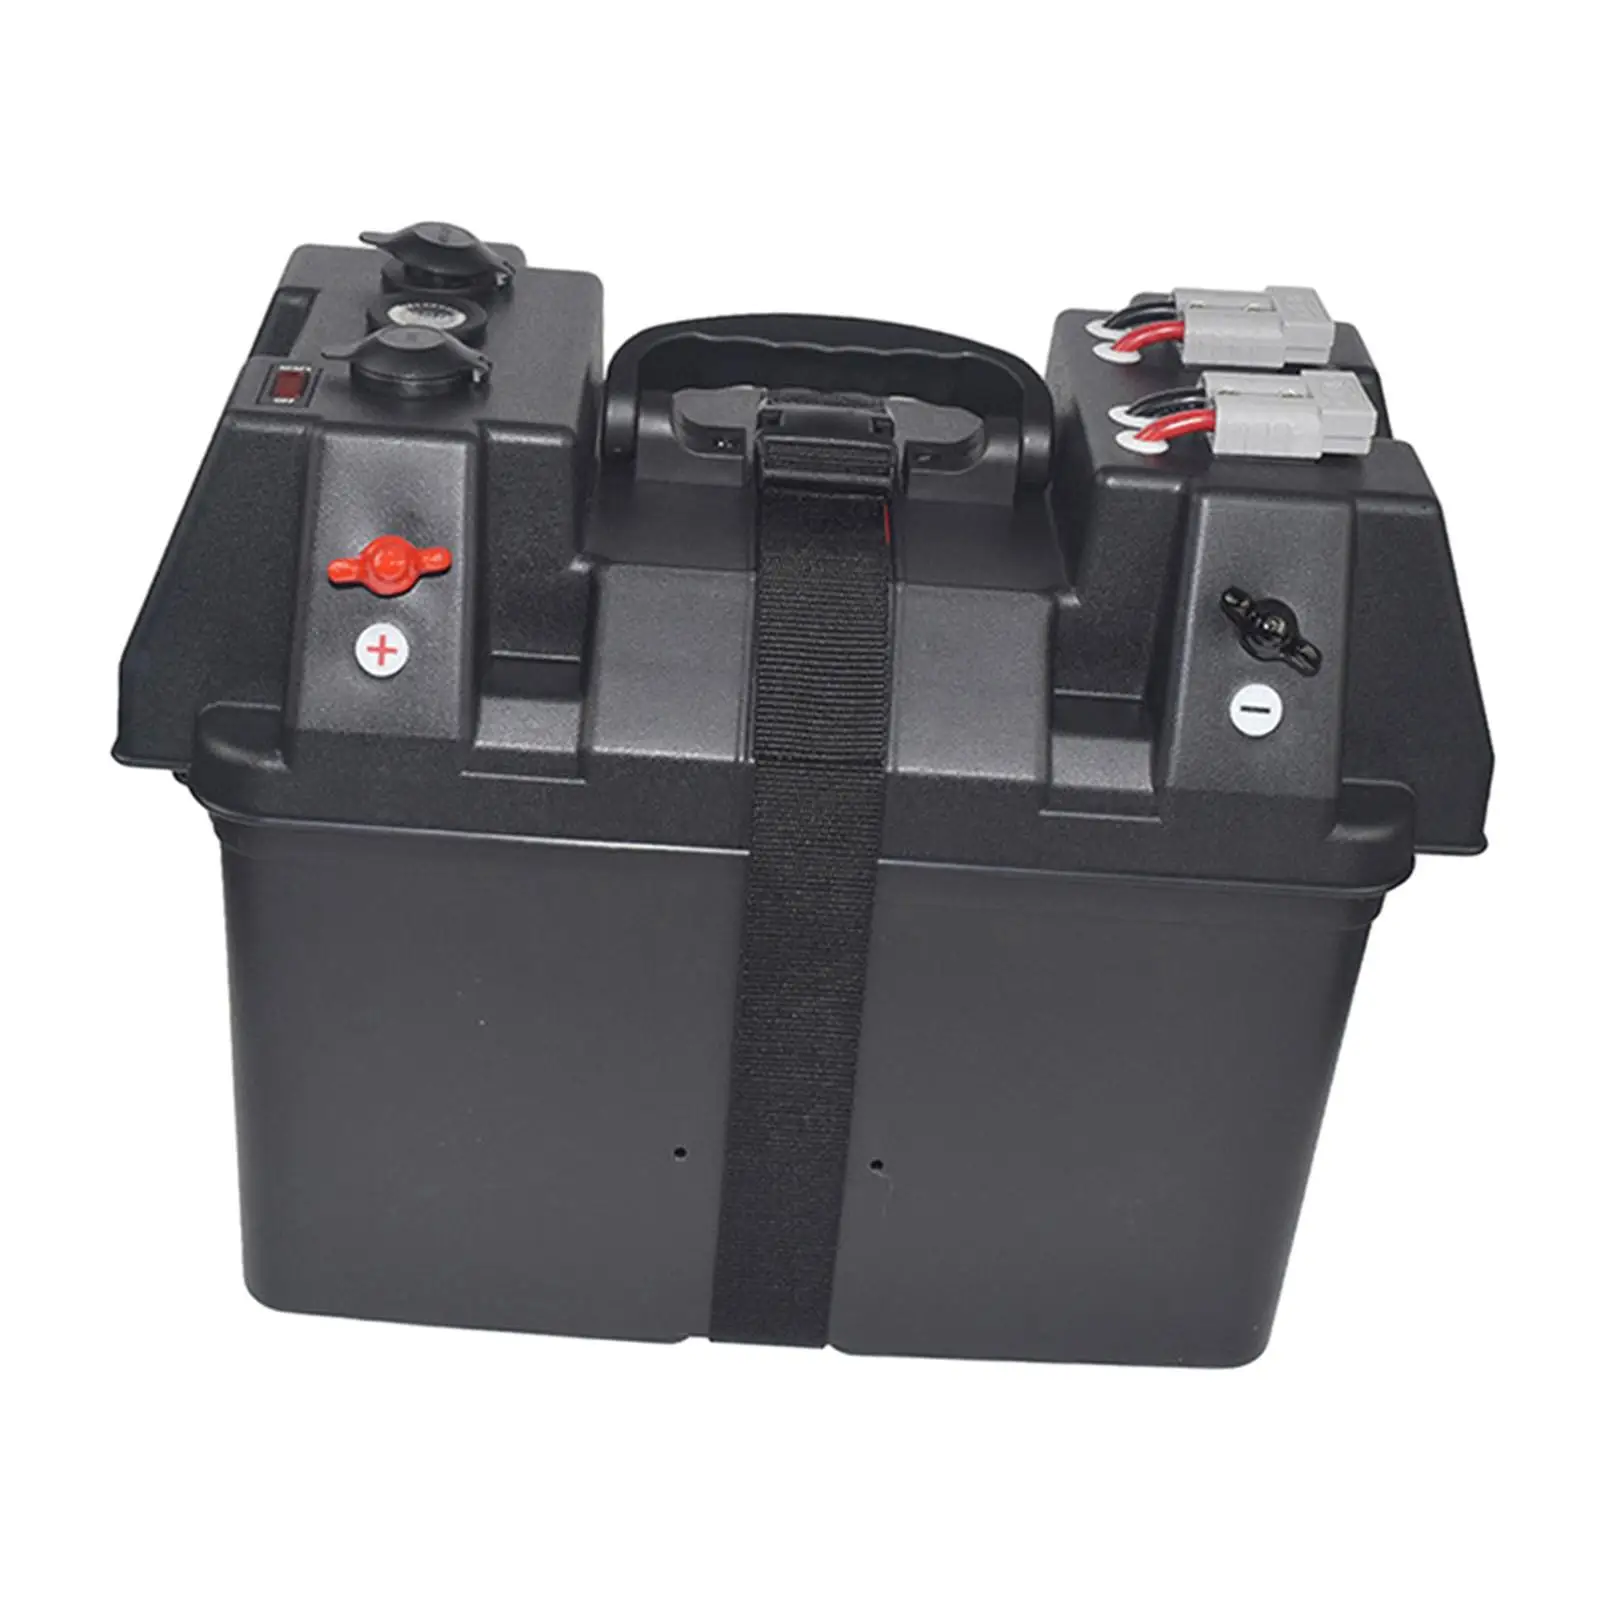 Motor Battery Box RV Battery Box Power Center Station Camping Travel Trailer Battery Box Outdoor Boat SUV Battery Carrier